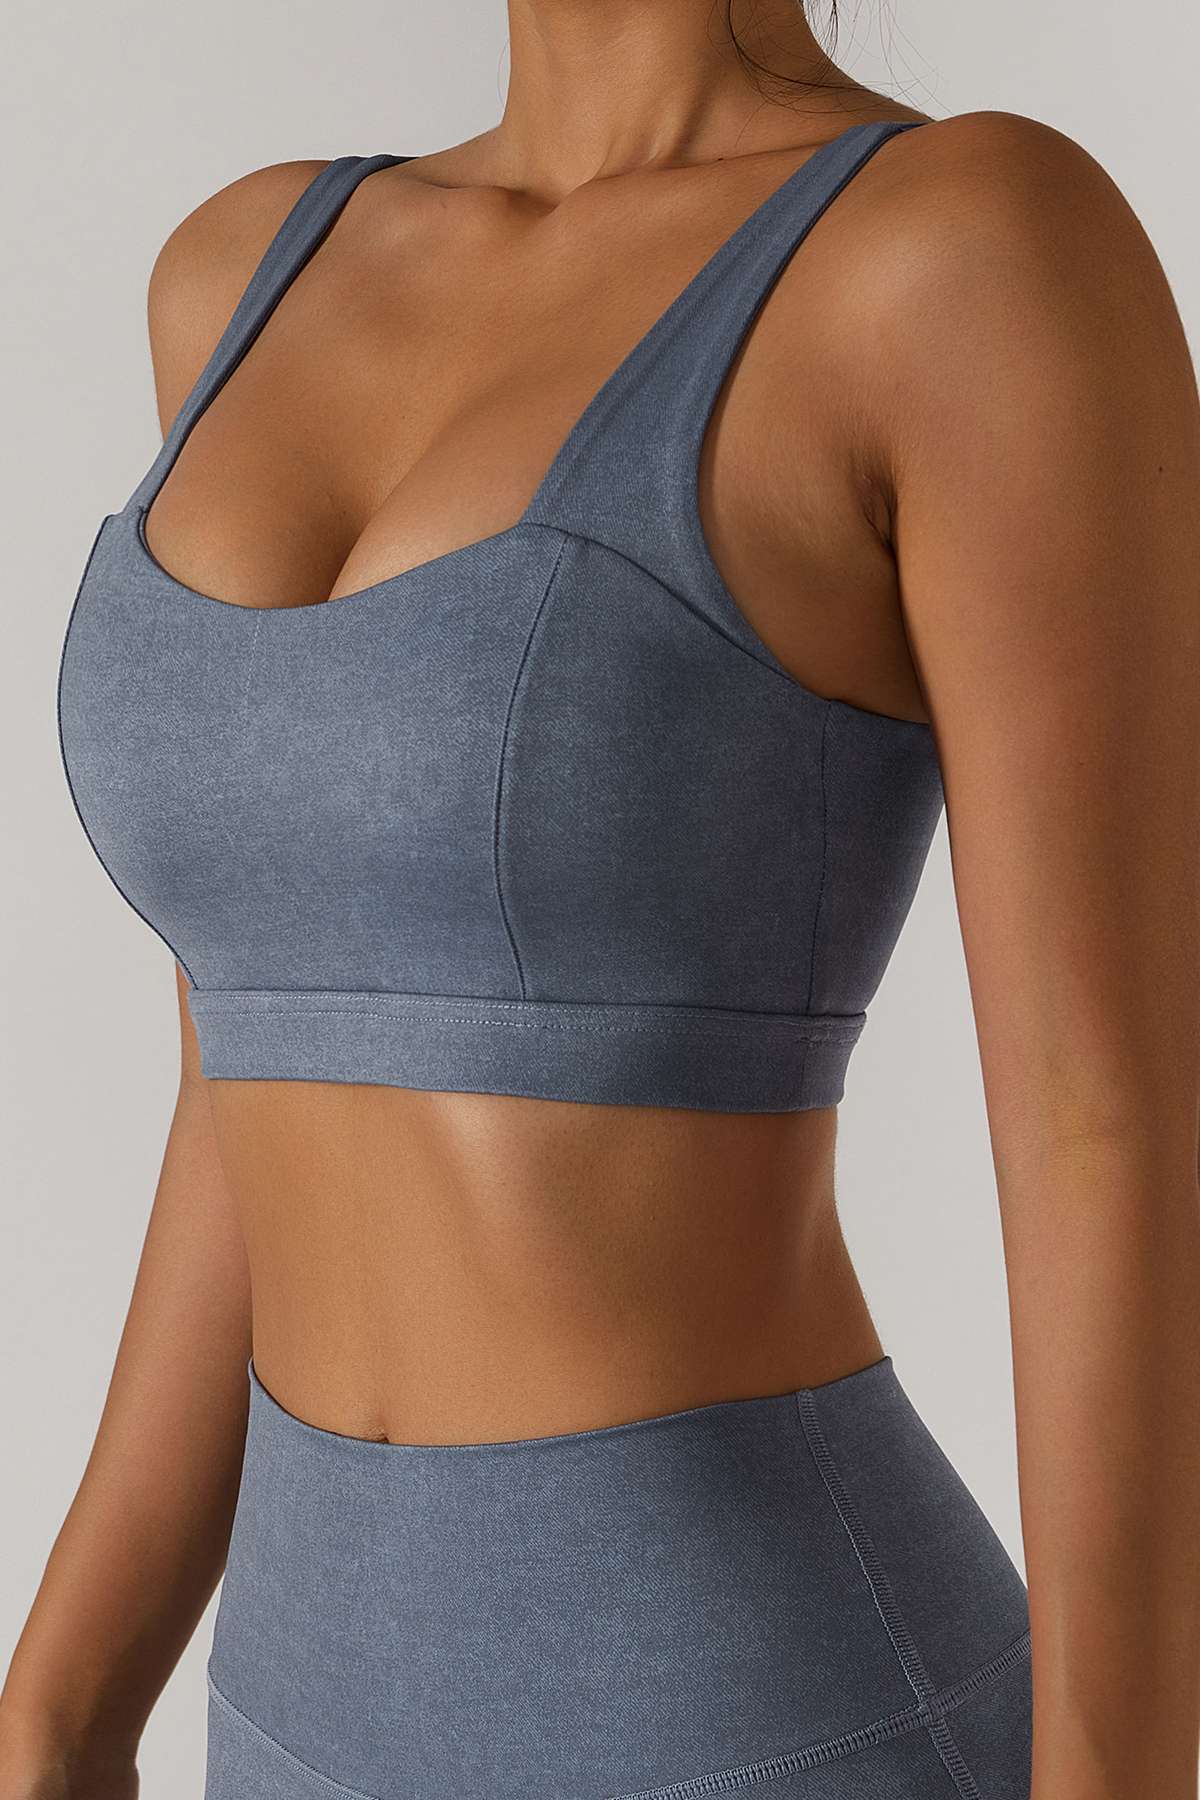 https://zioccie.com/cdn/shop/products/straight-straps-backless-faux-denim-push-up-sports-bras-for-gmy-workout-denim-blue_3.jpg?v=1655644120